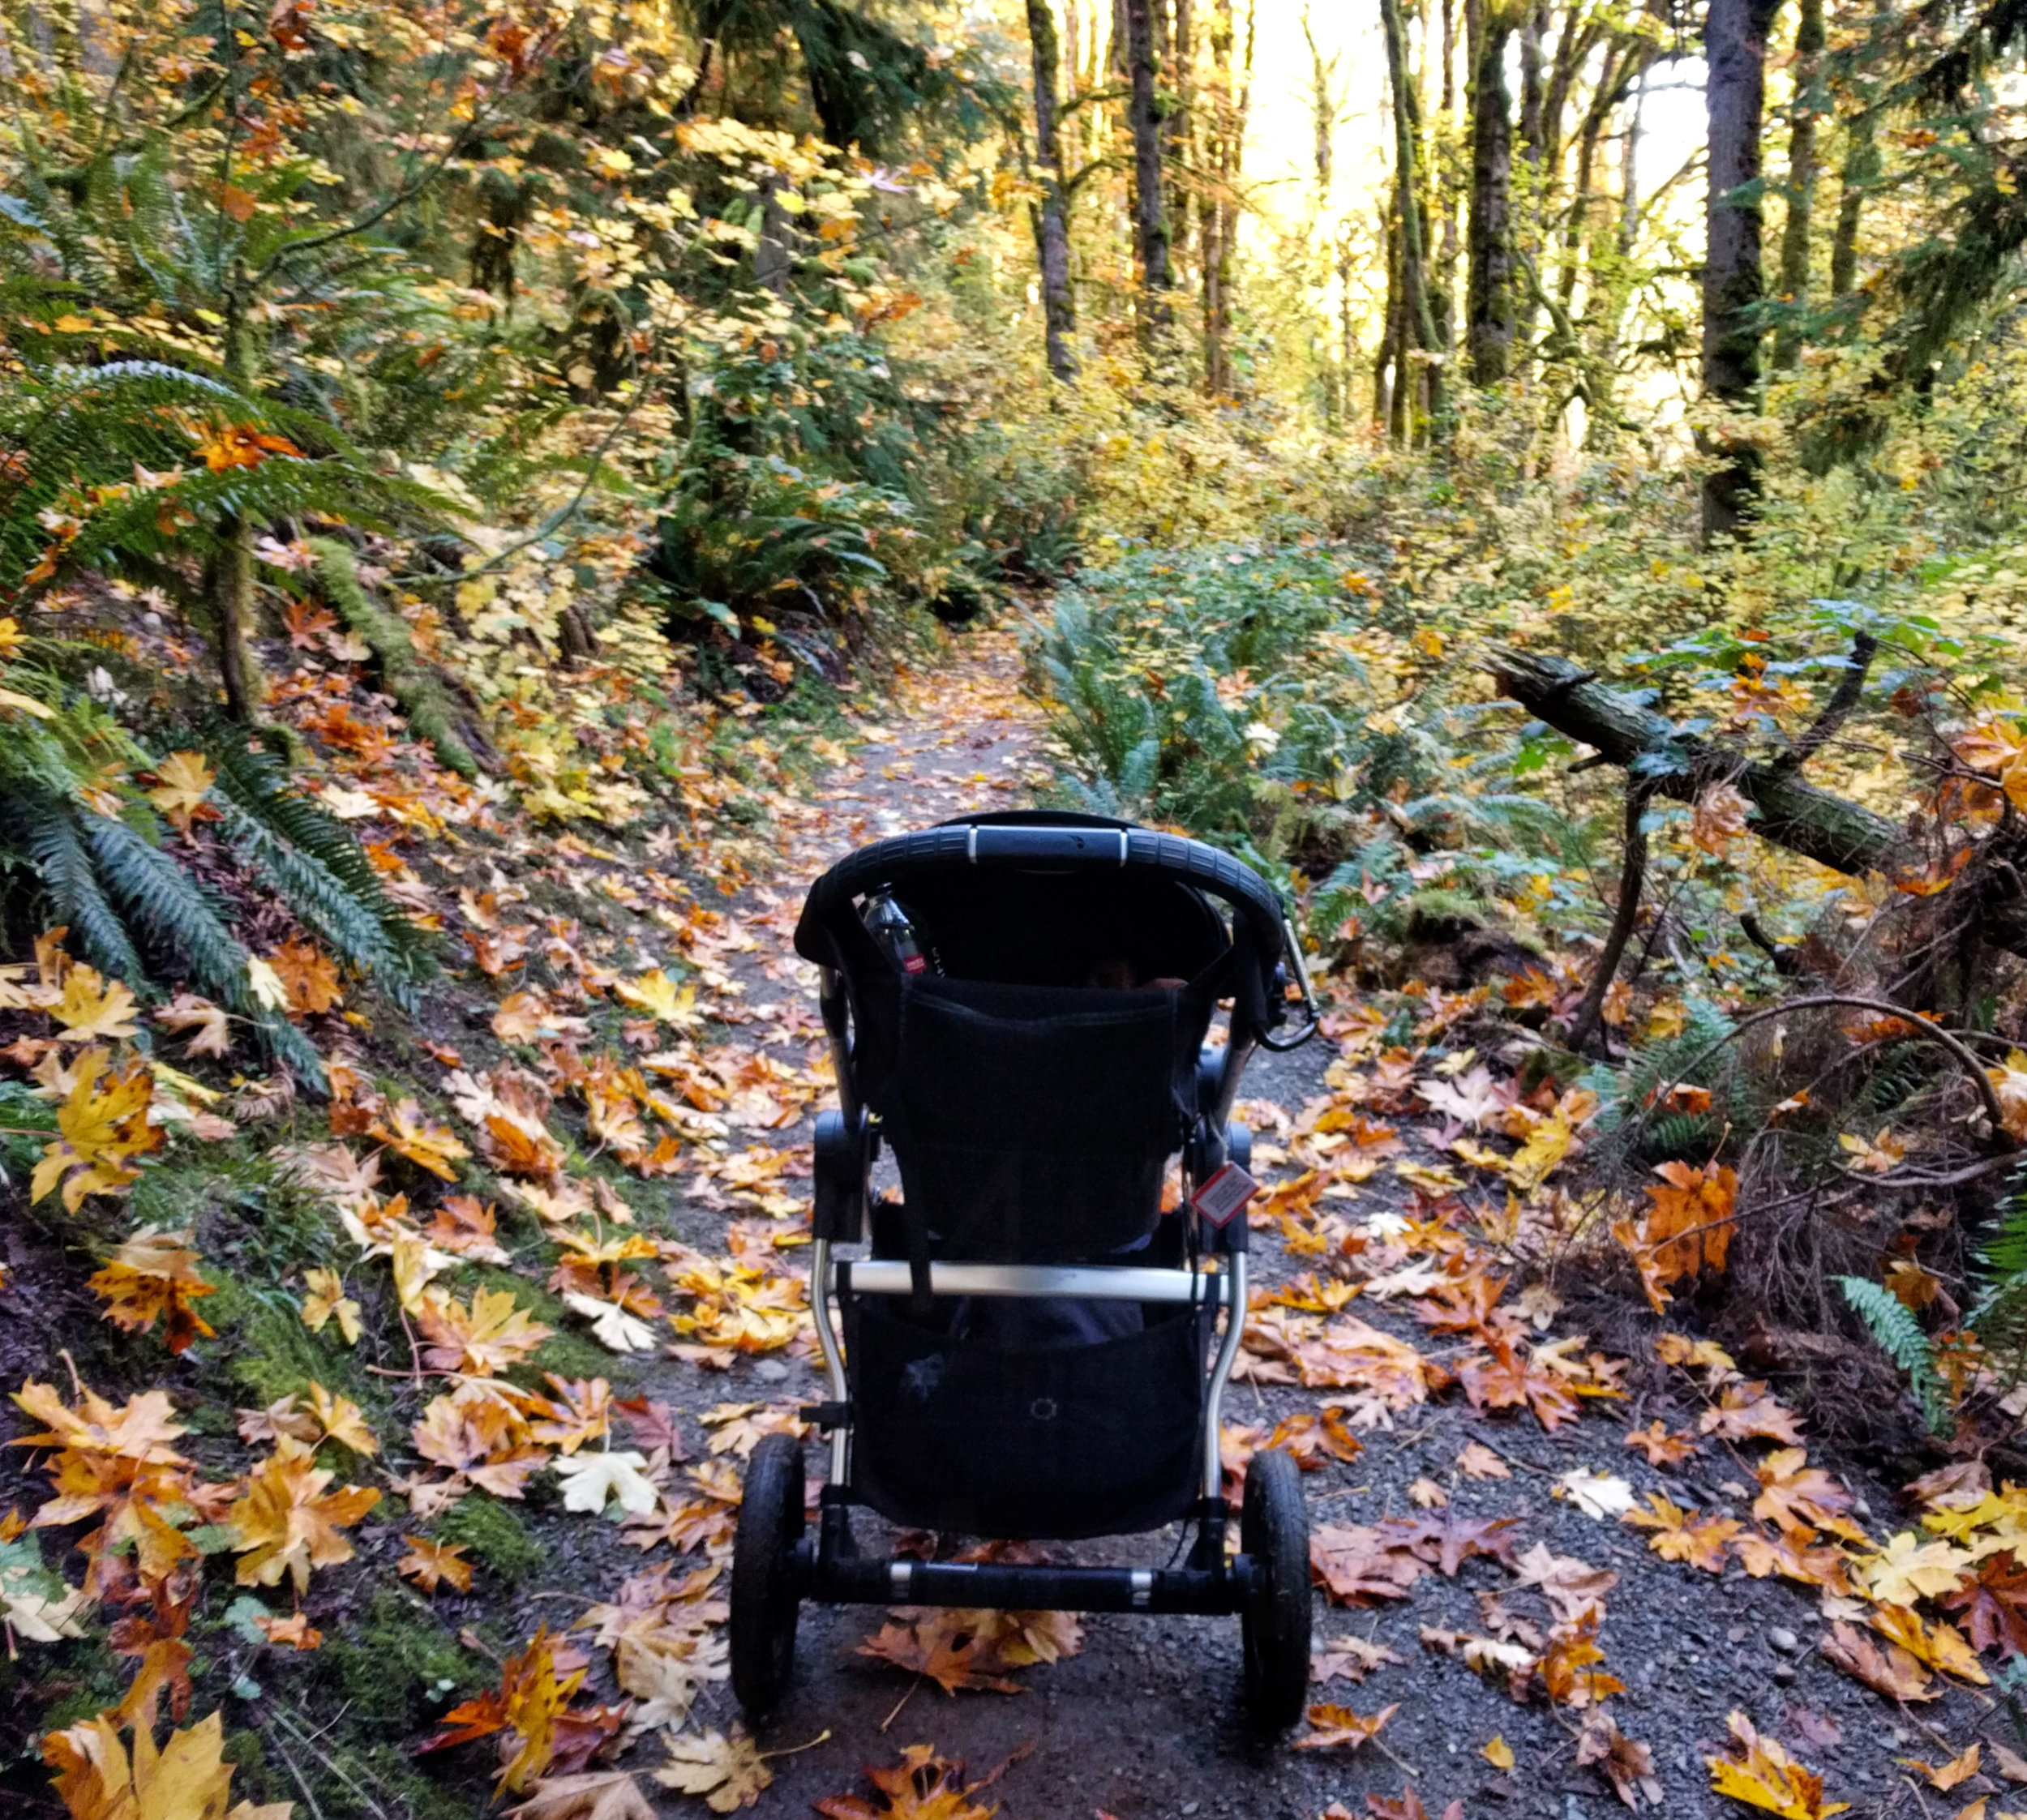 Stroller (though not very stroller-friendly) along the Evan's Creek Preserve trail in autumn